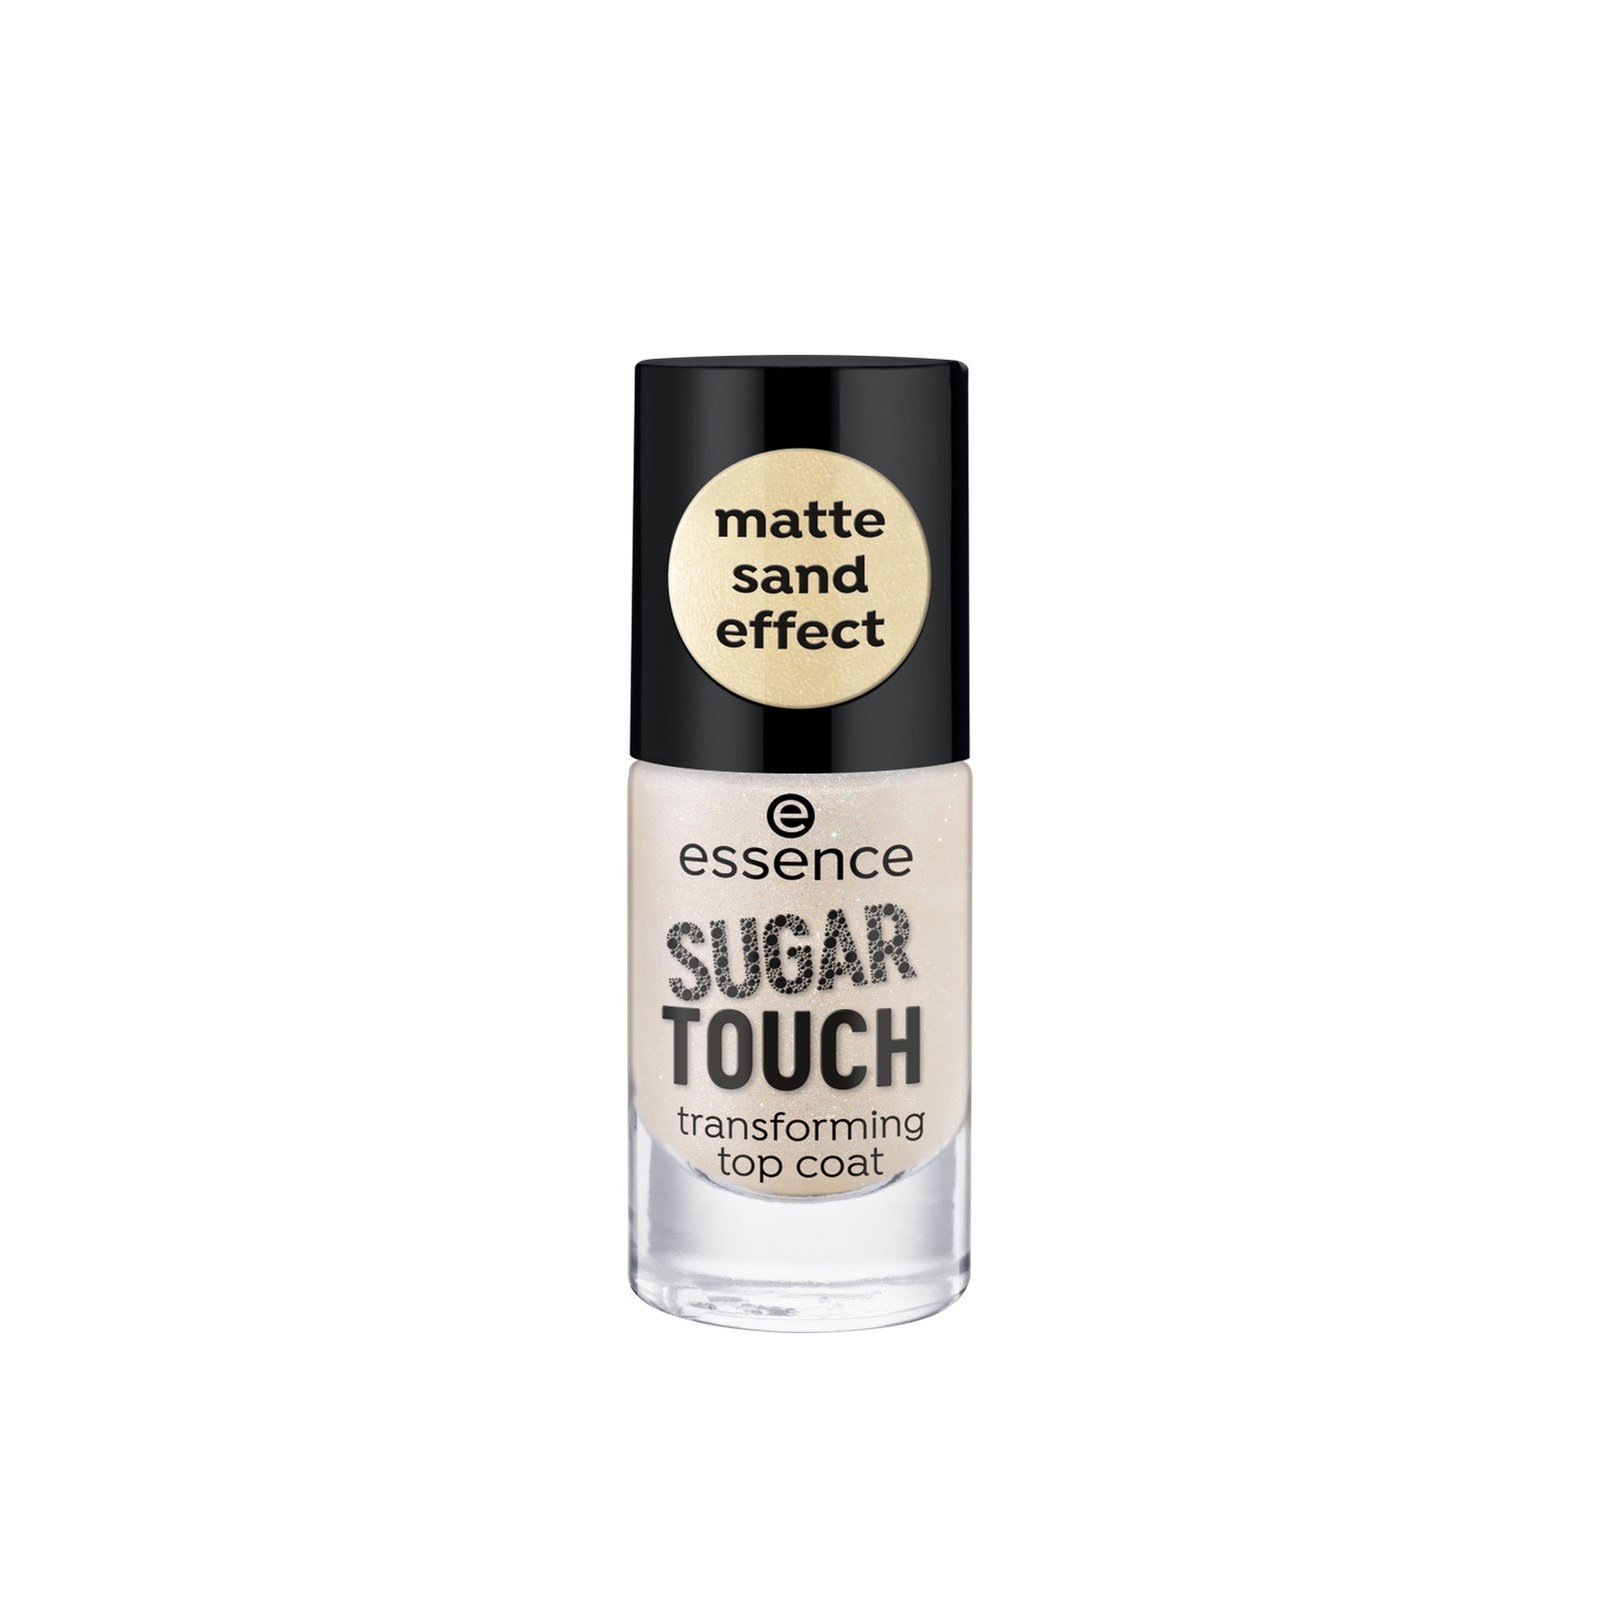 essence Sugar Touch Transforming Top Coat 8ml